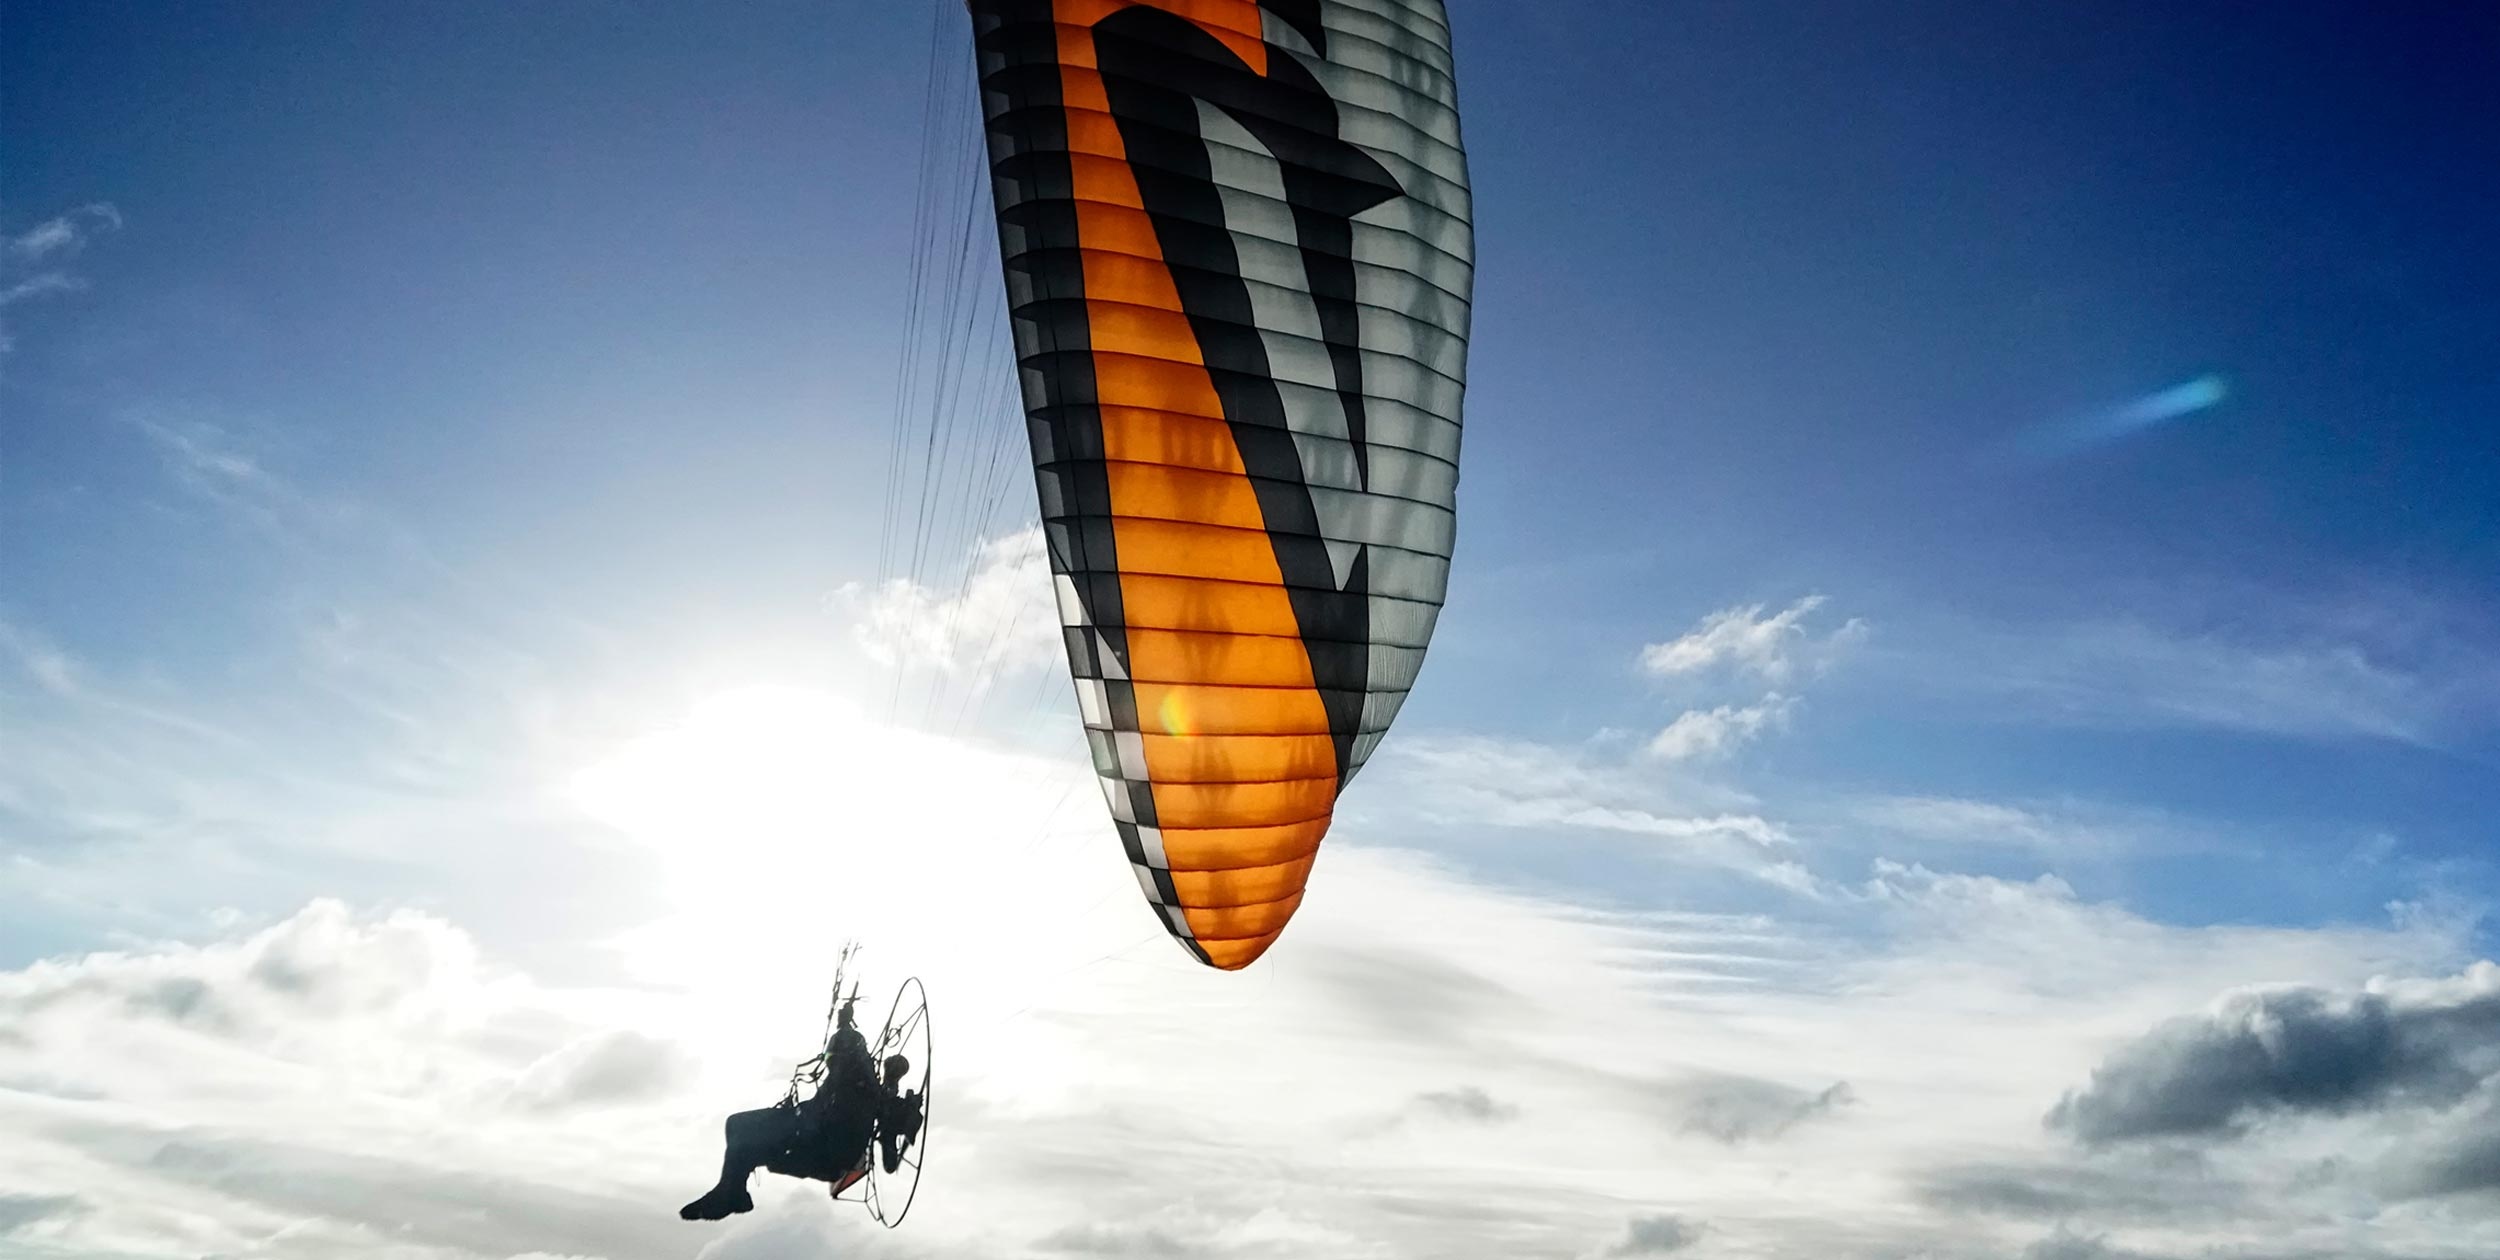 Paramotoring: Apco F1 PPG, Apco aviation, Competition paraglider. 2500x1260 HD Wallpaper.